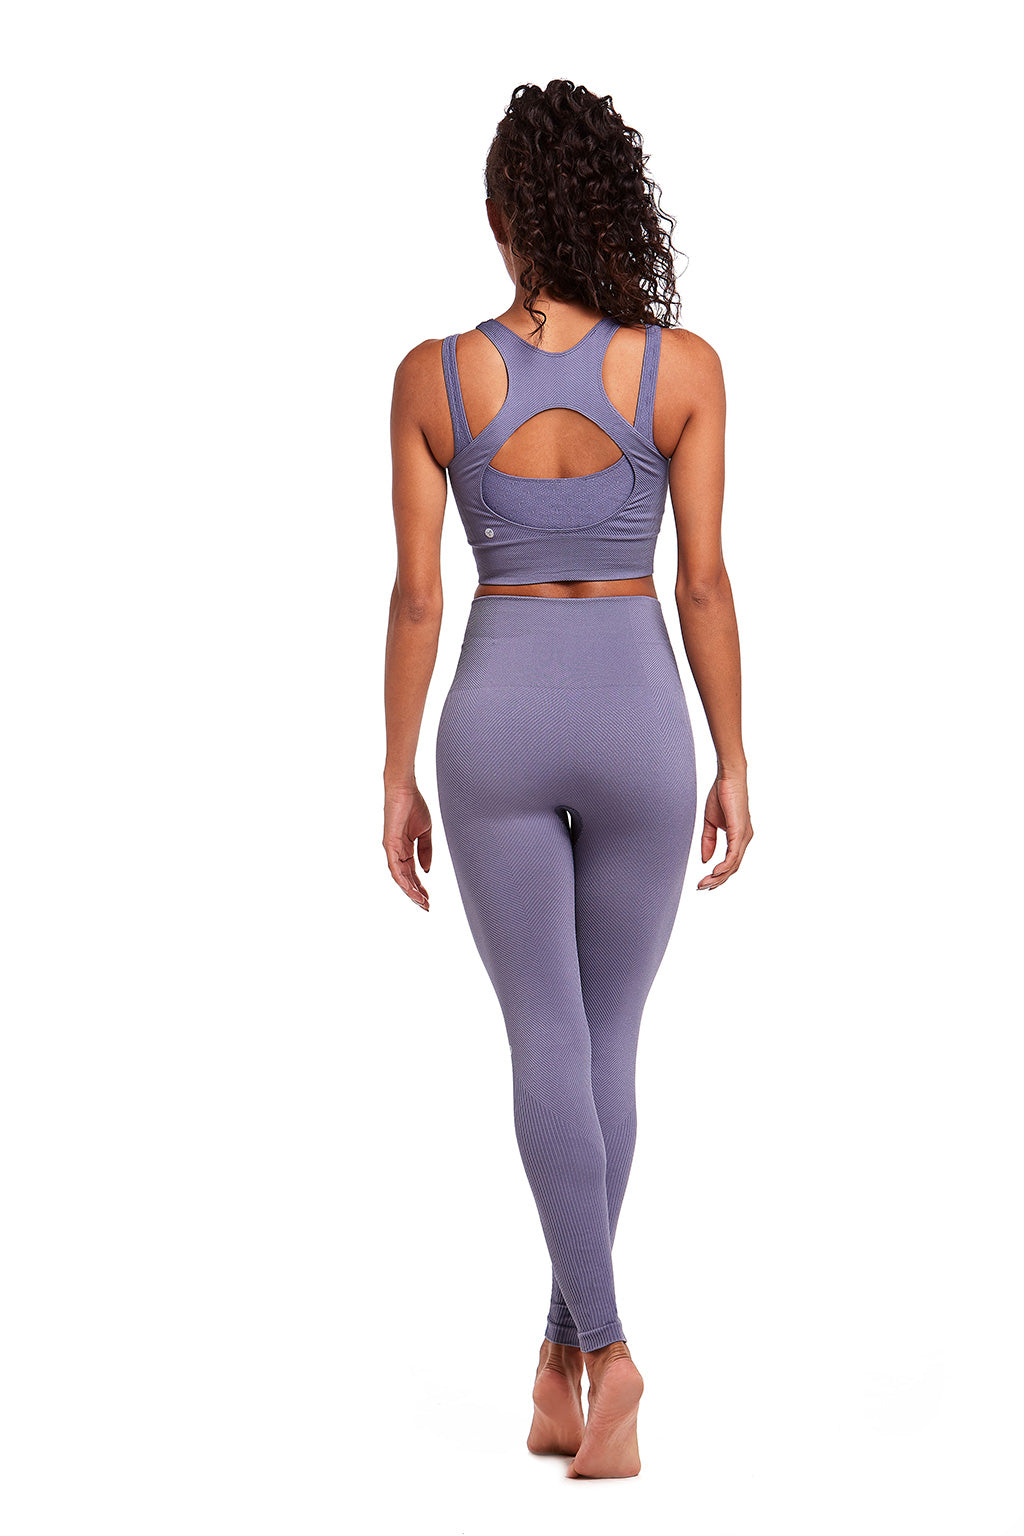 Our exotic Brazilian Lycra fitness and casual leggings. The seamed